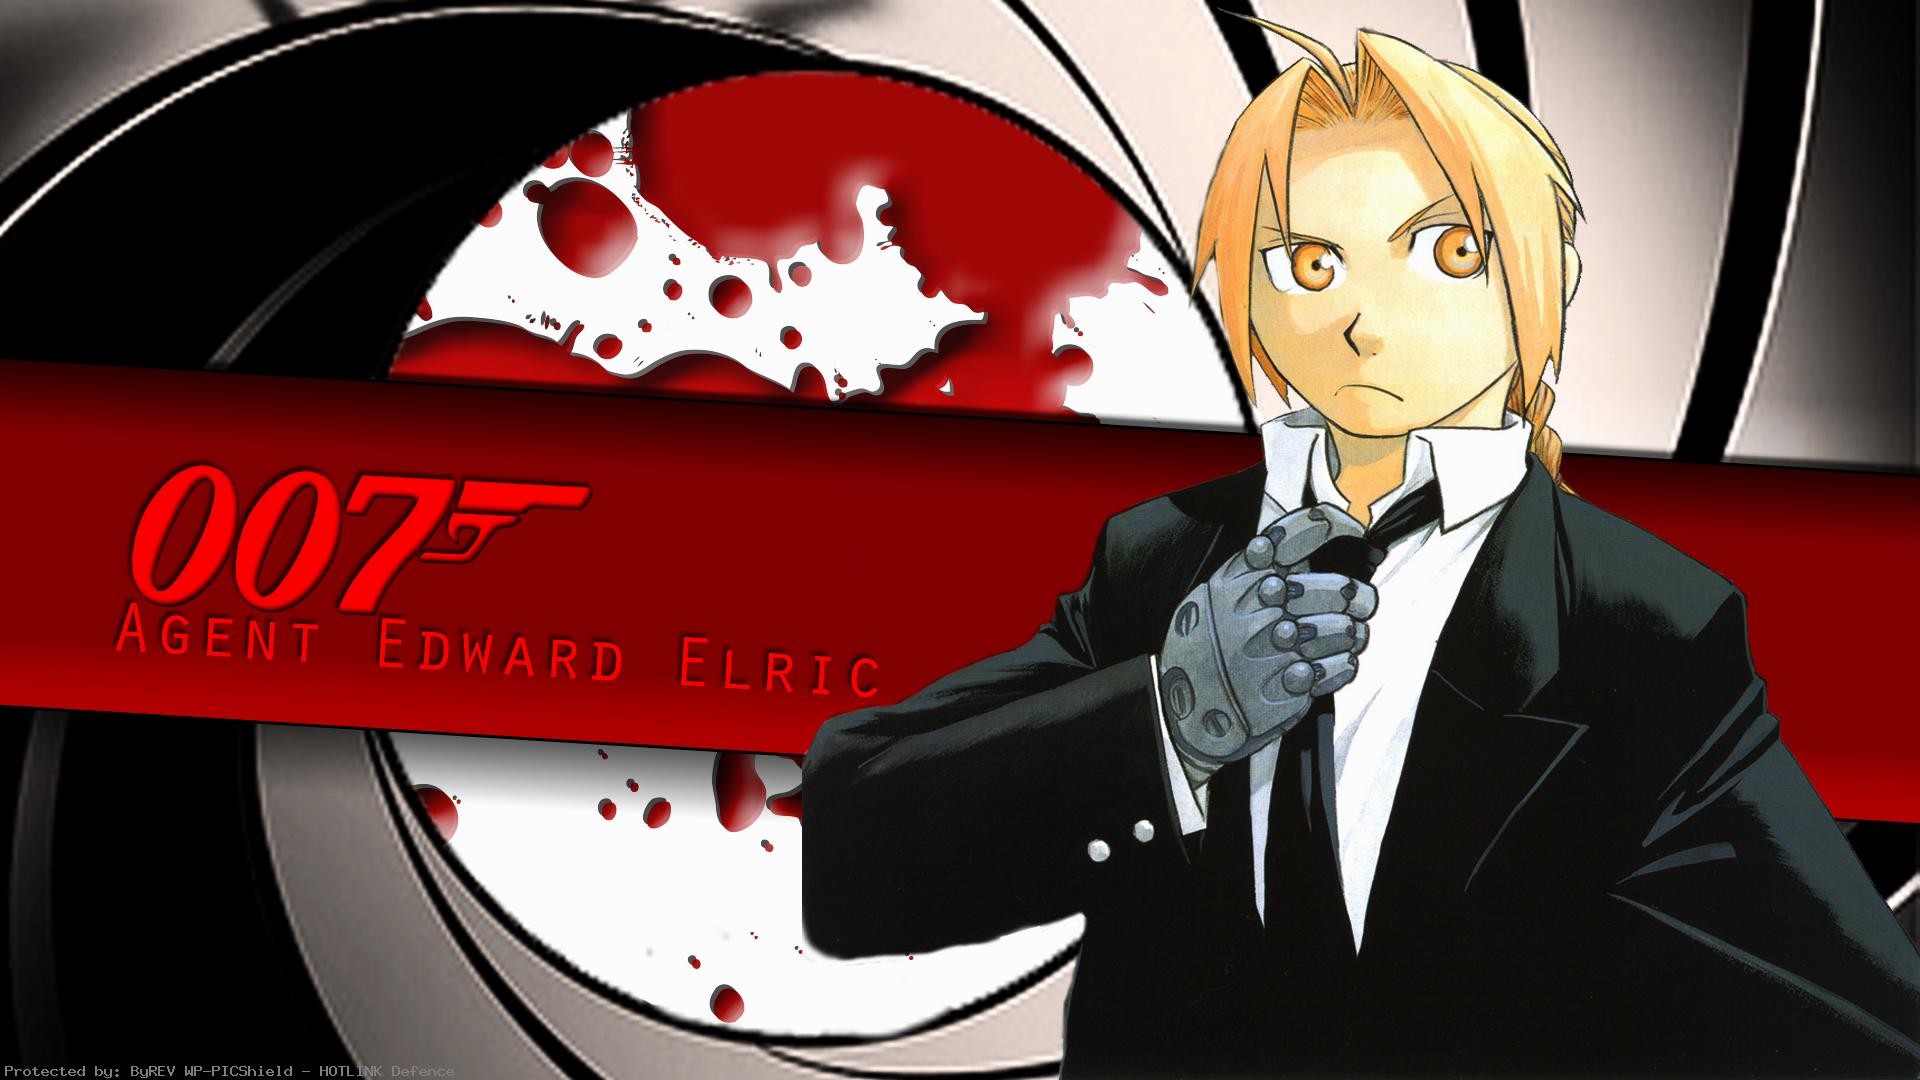 1920x1080 Agent-Edward-Elric-by-SerialKiller-wallpaper-wp8002335